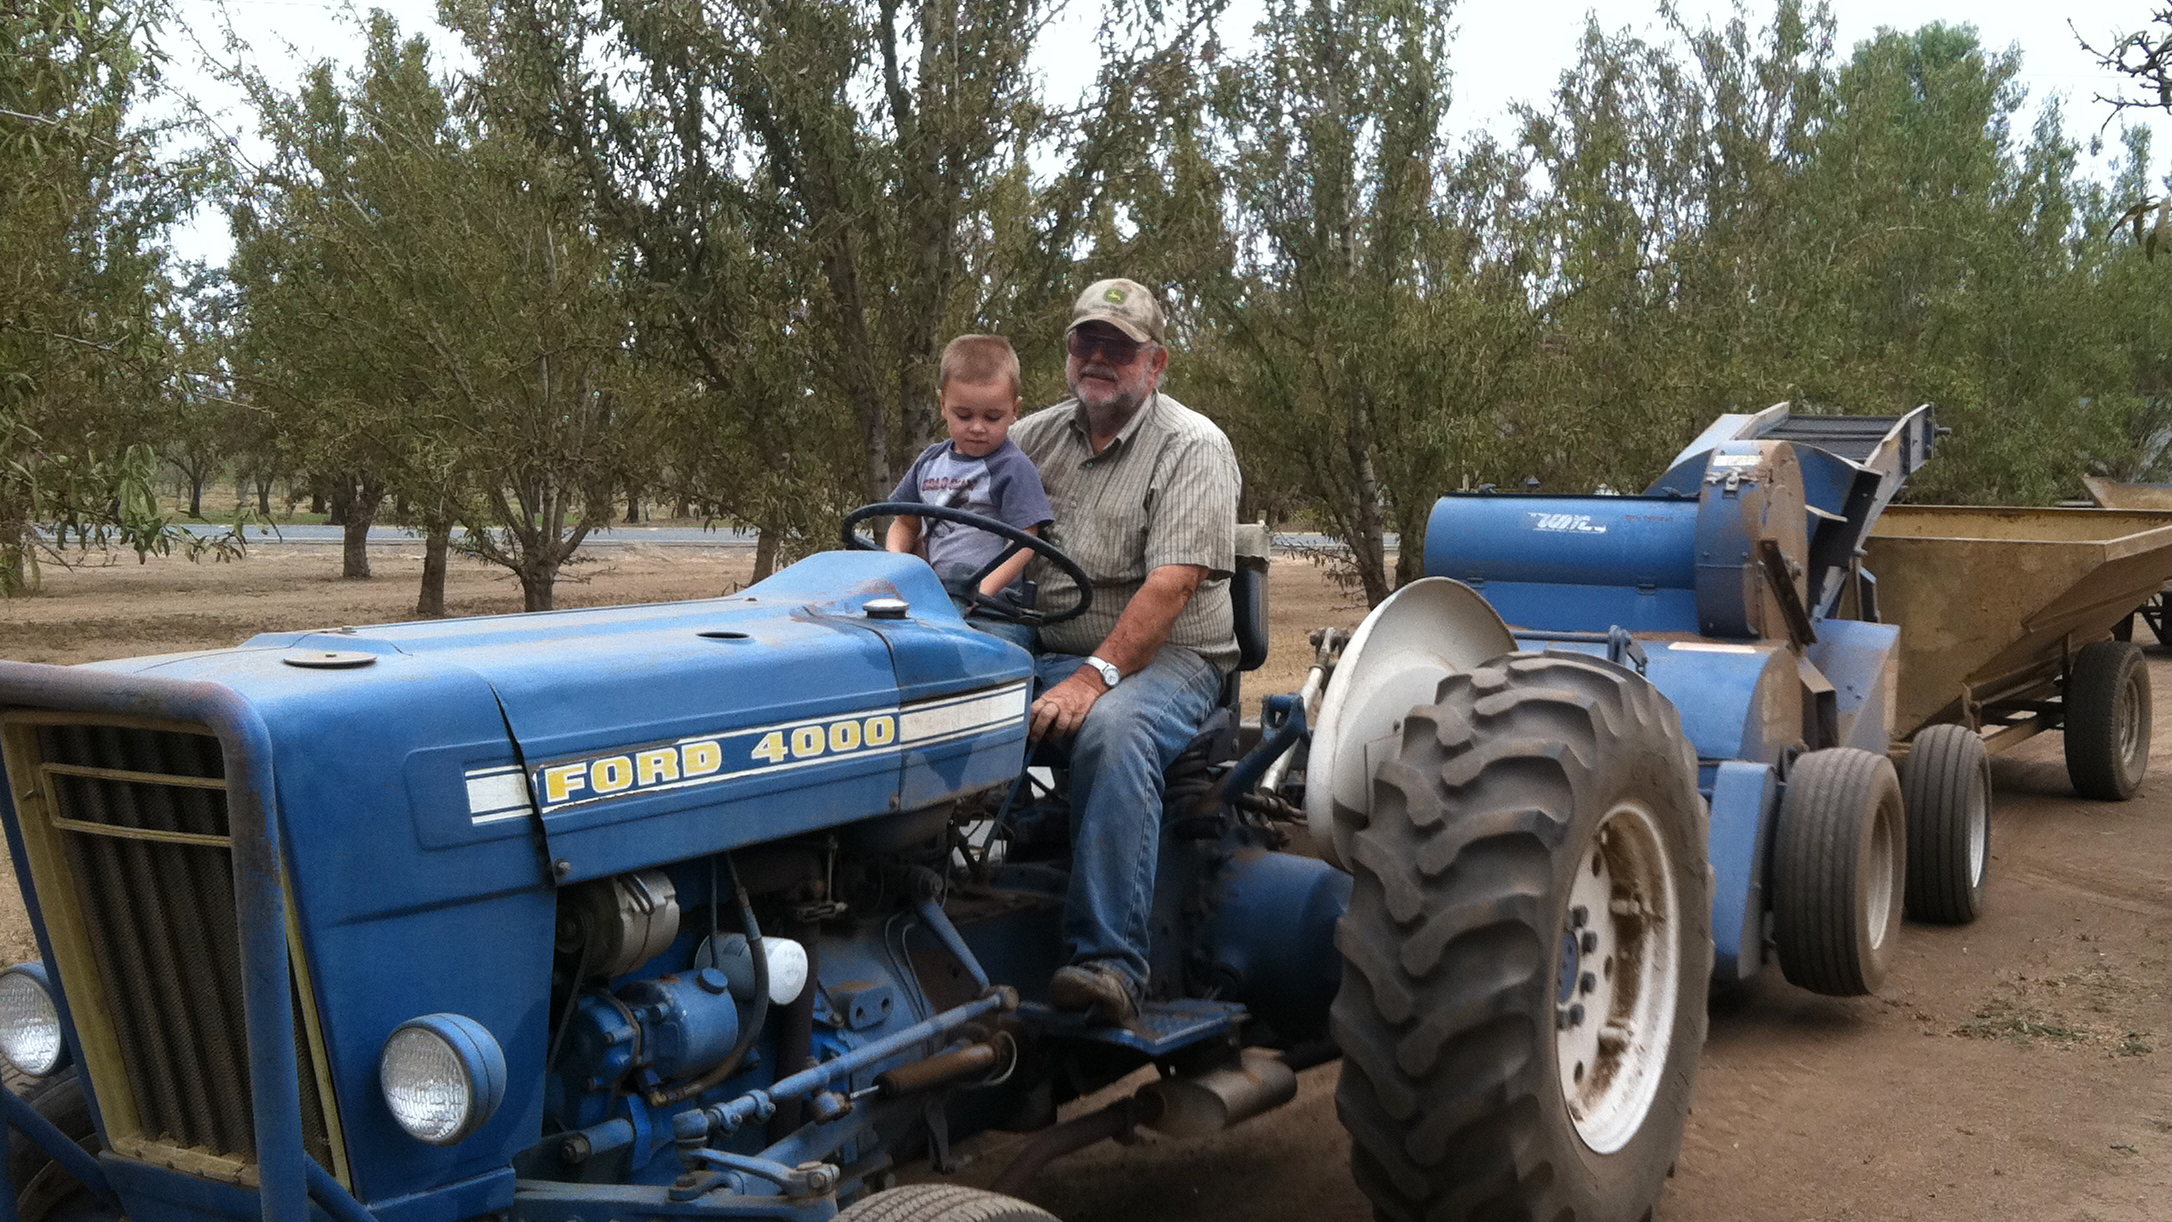 Jerry Miguel and his grandson on a blue tractor in an orchard.